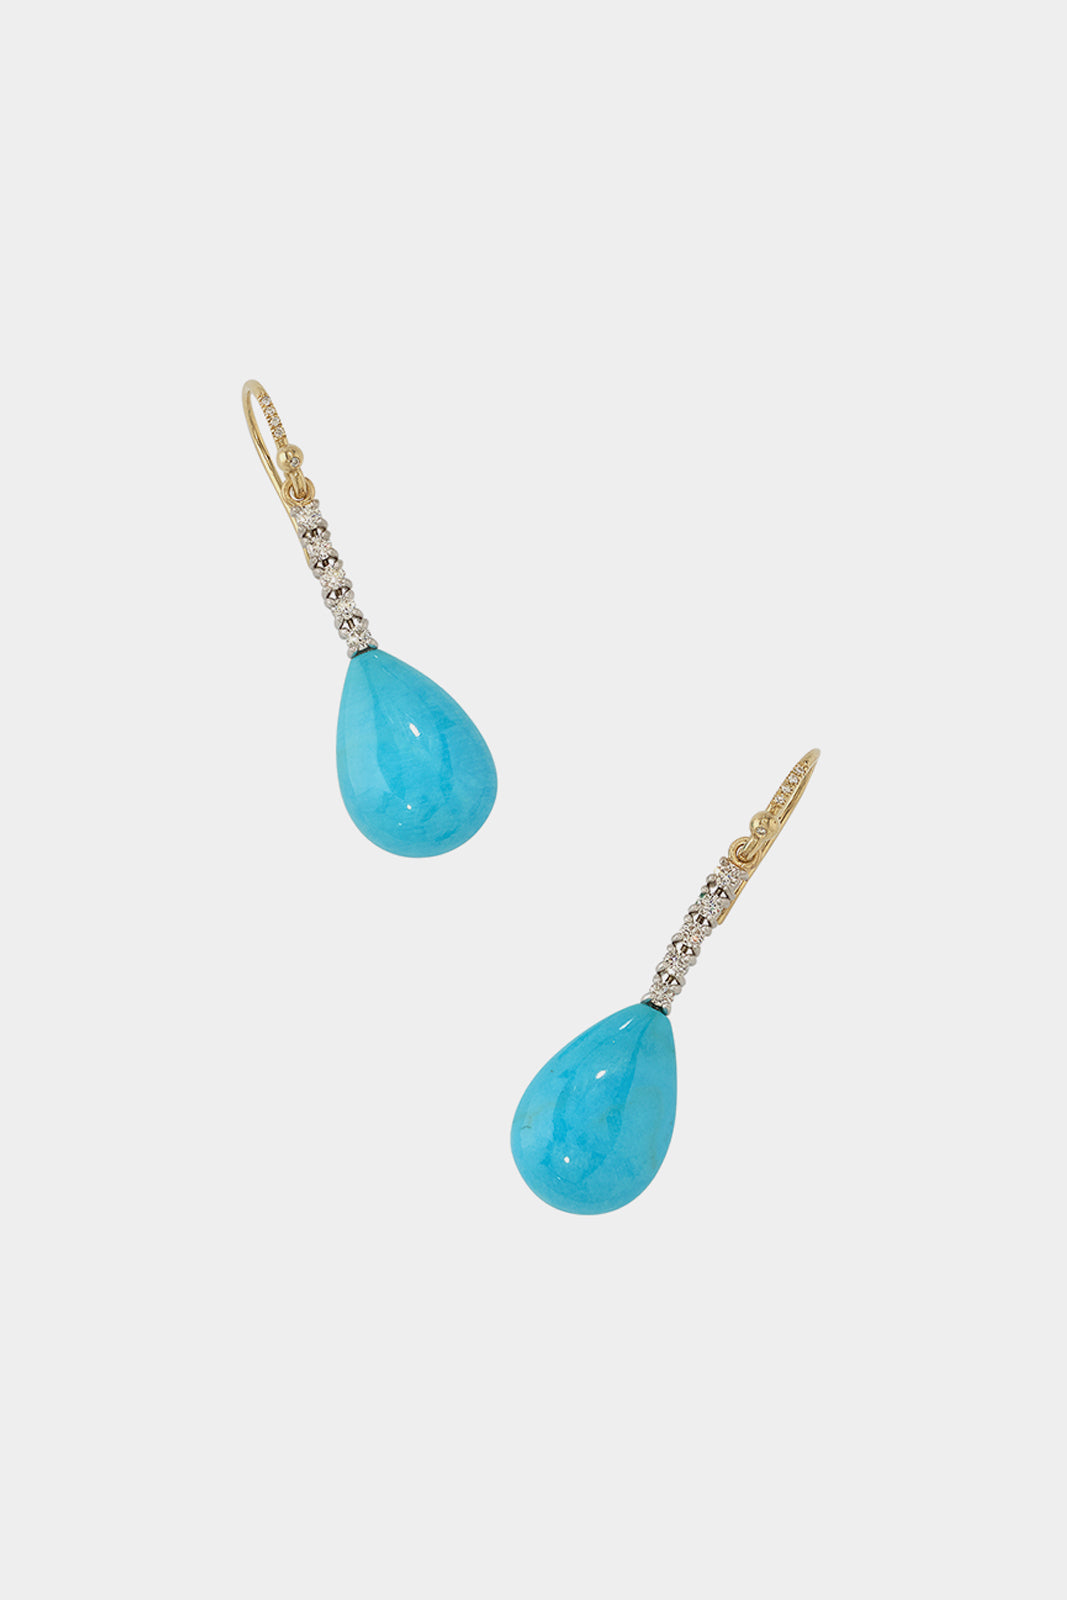 18K Yellow and White Gold Turquoise Drops with Diamond Pave